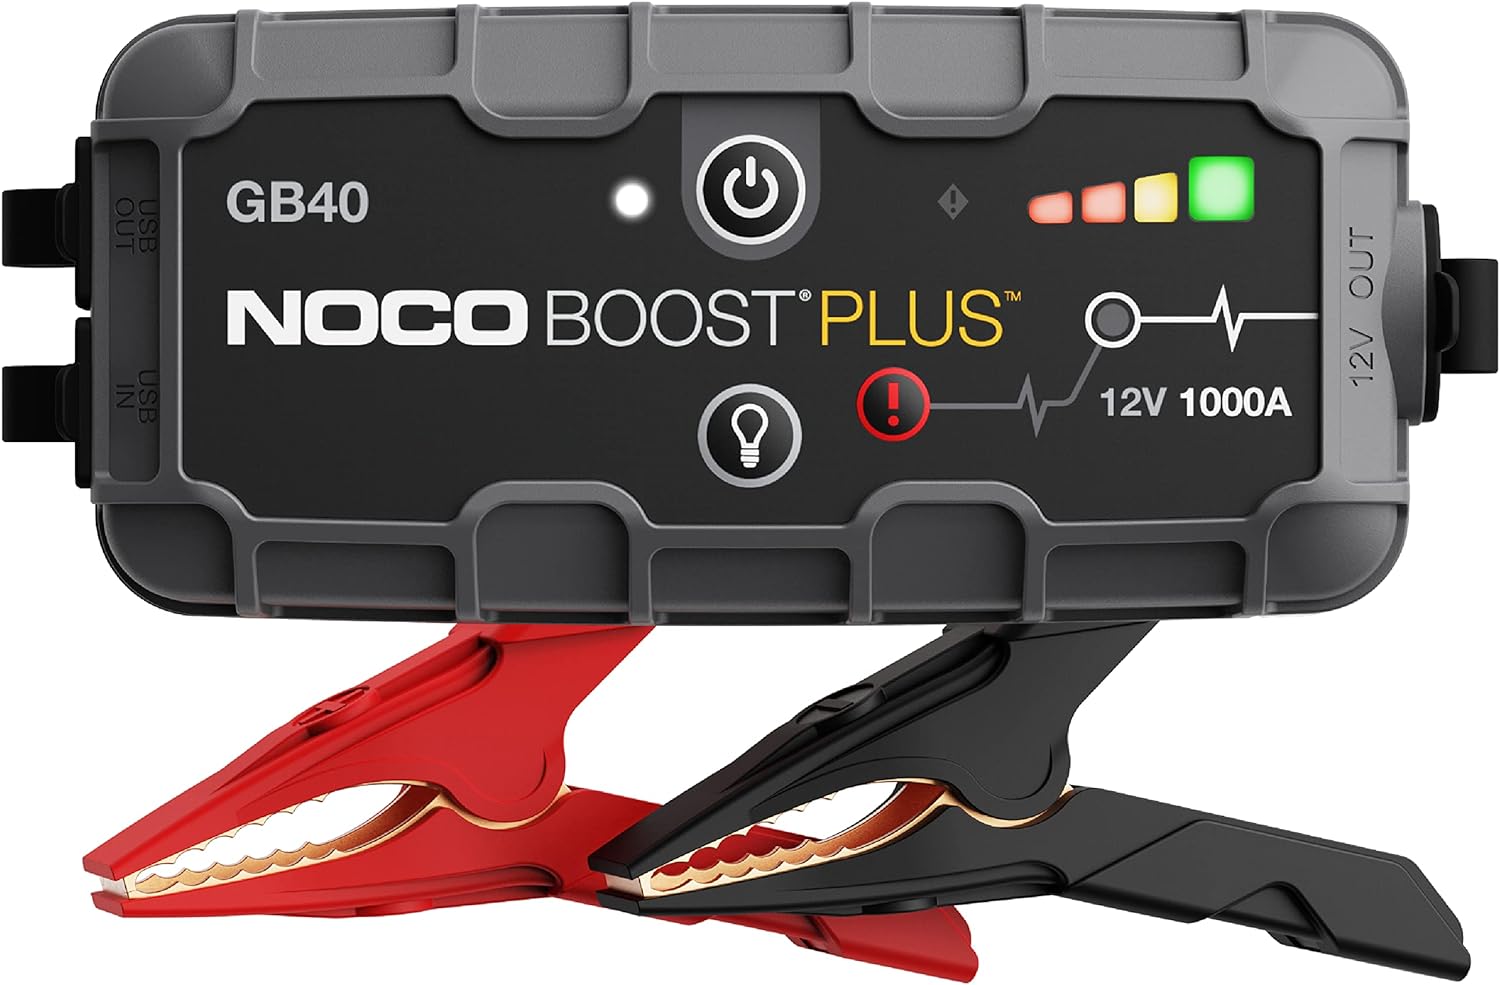 NOCO Boost Plus GB40 1000 Amp 12-Volt UltraSafe Portable Lithium Car Battery Jump Starter Pack for up To 6-Liter Petrol and 3-Liter Diesel Engines 5022NO